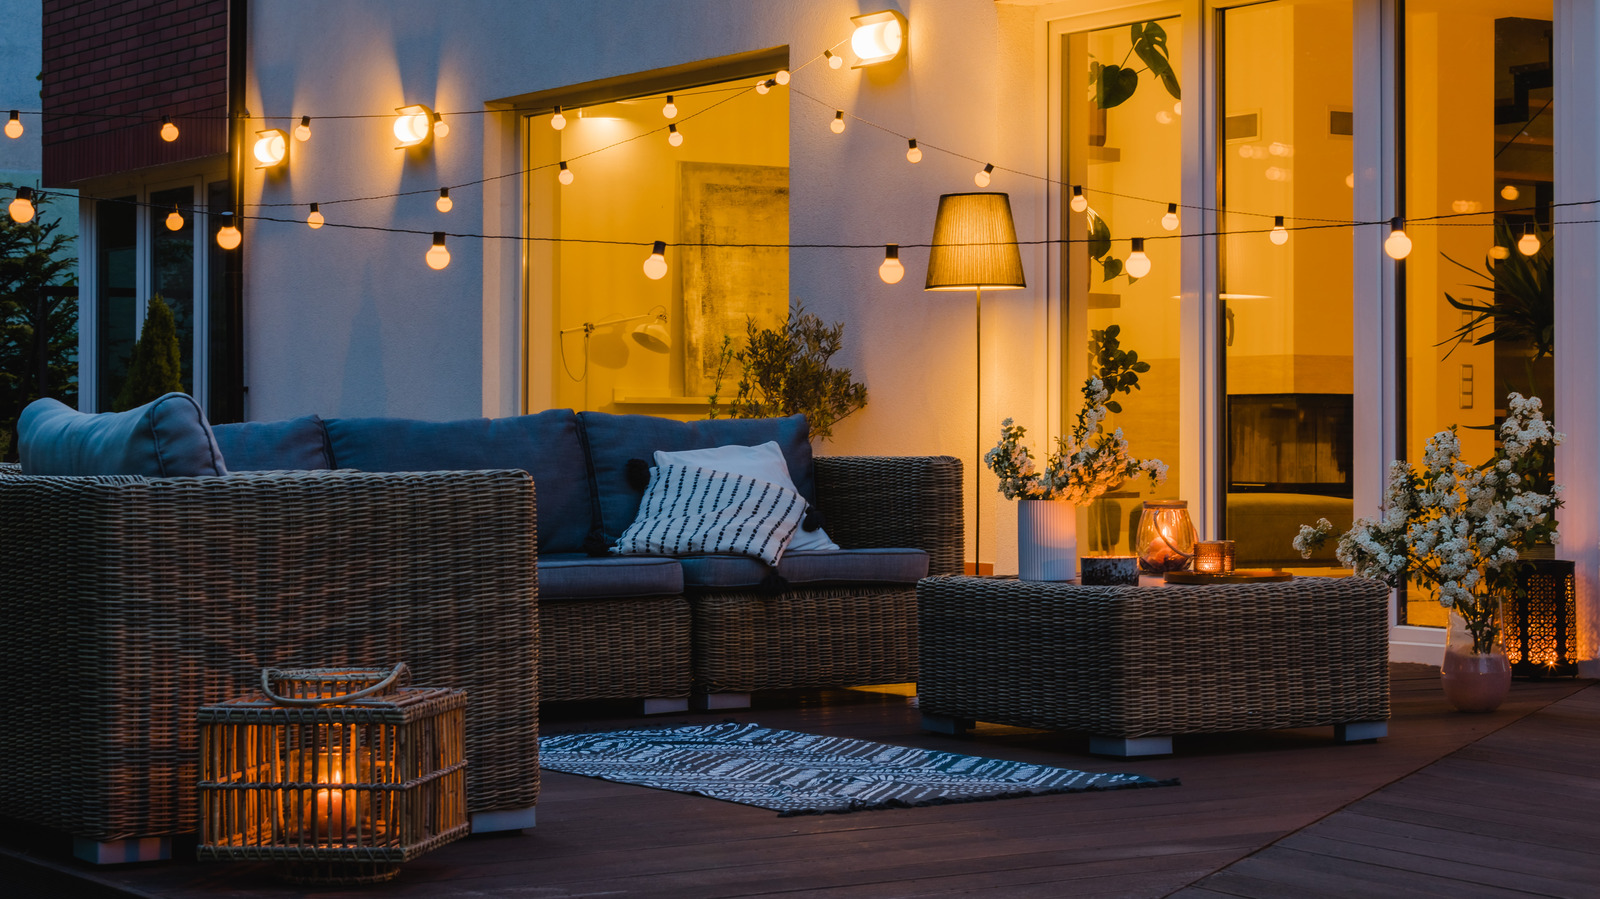 4 Pointers For Buying The Perfect Outdoor Furniture